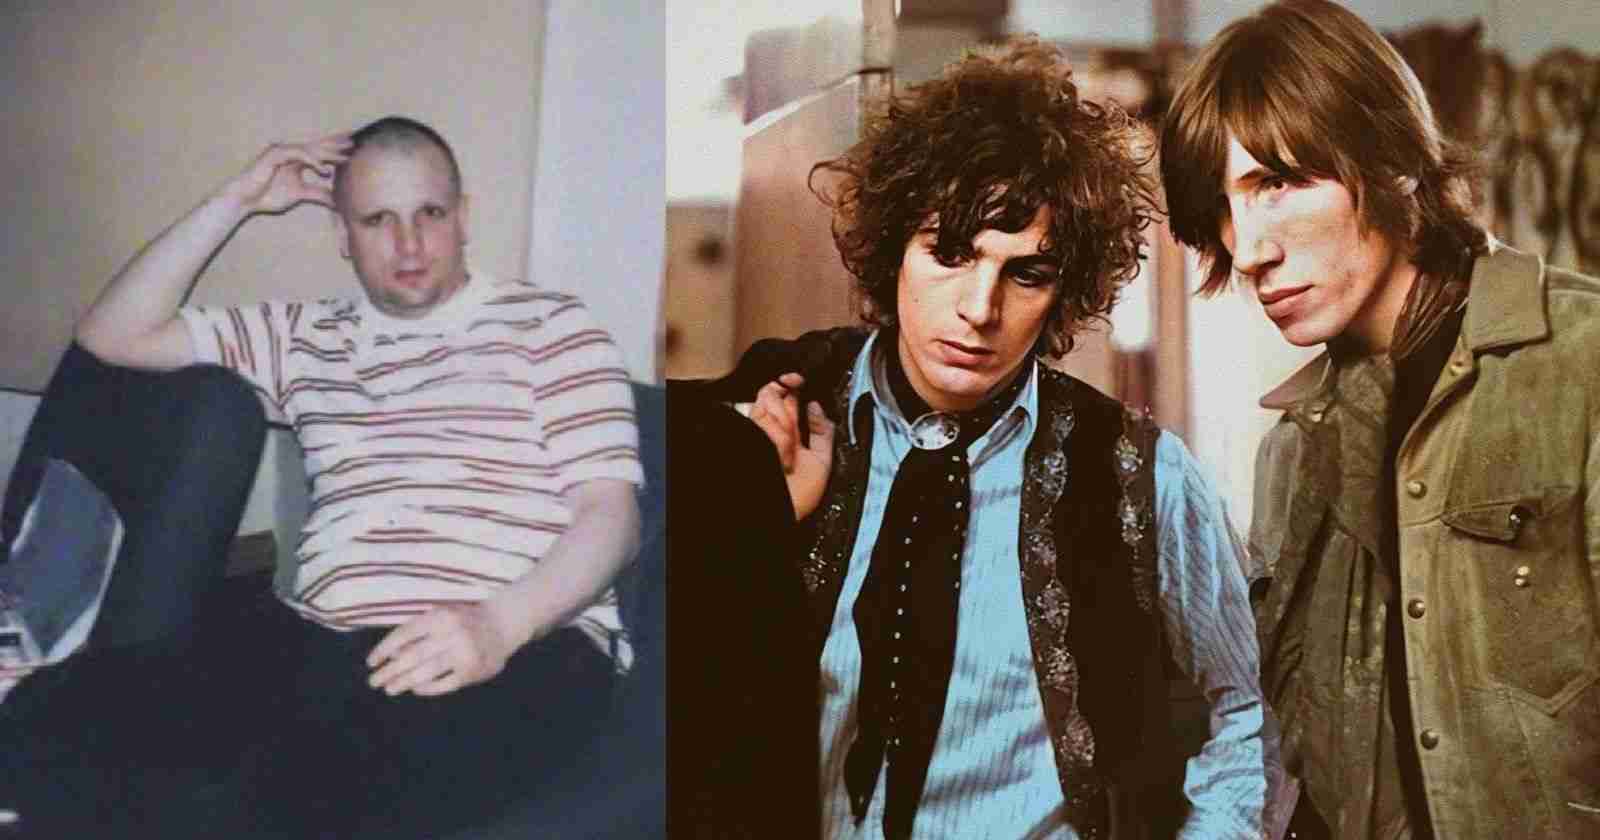 The strange and last interview of Pink Floyd ex-member Syd Barrett